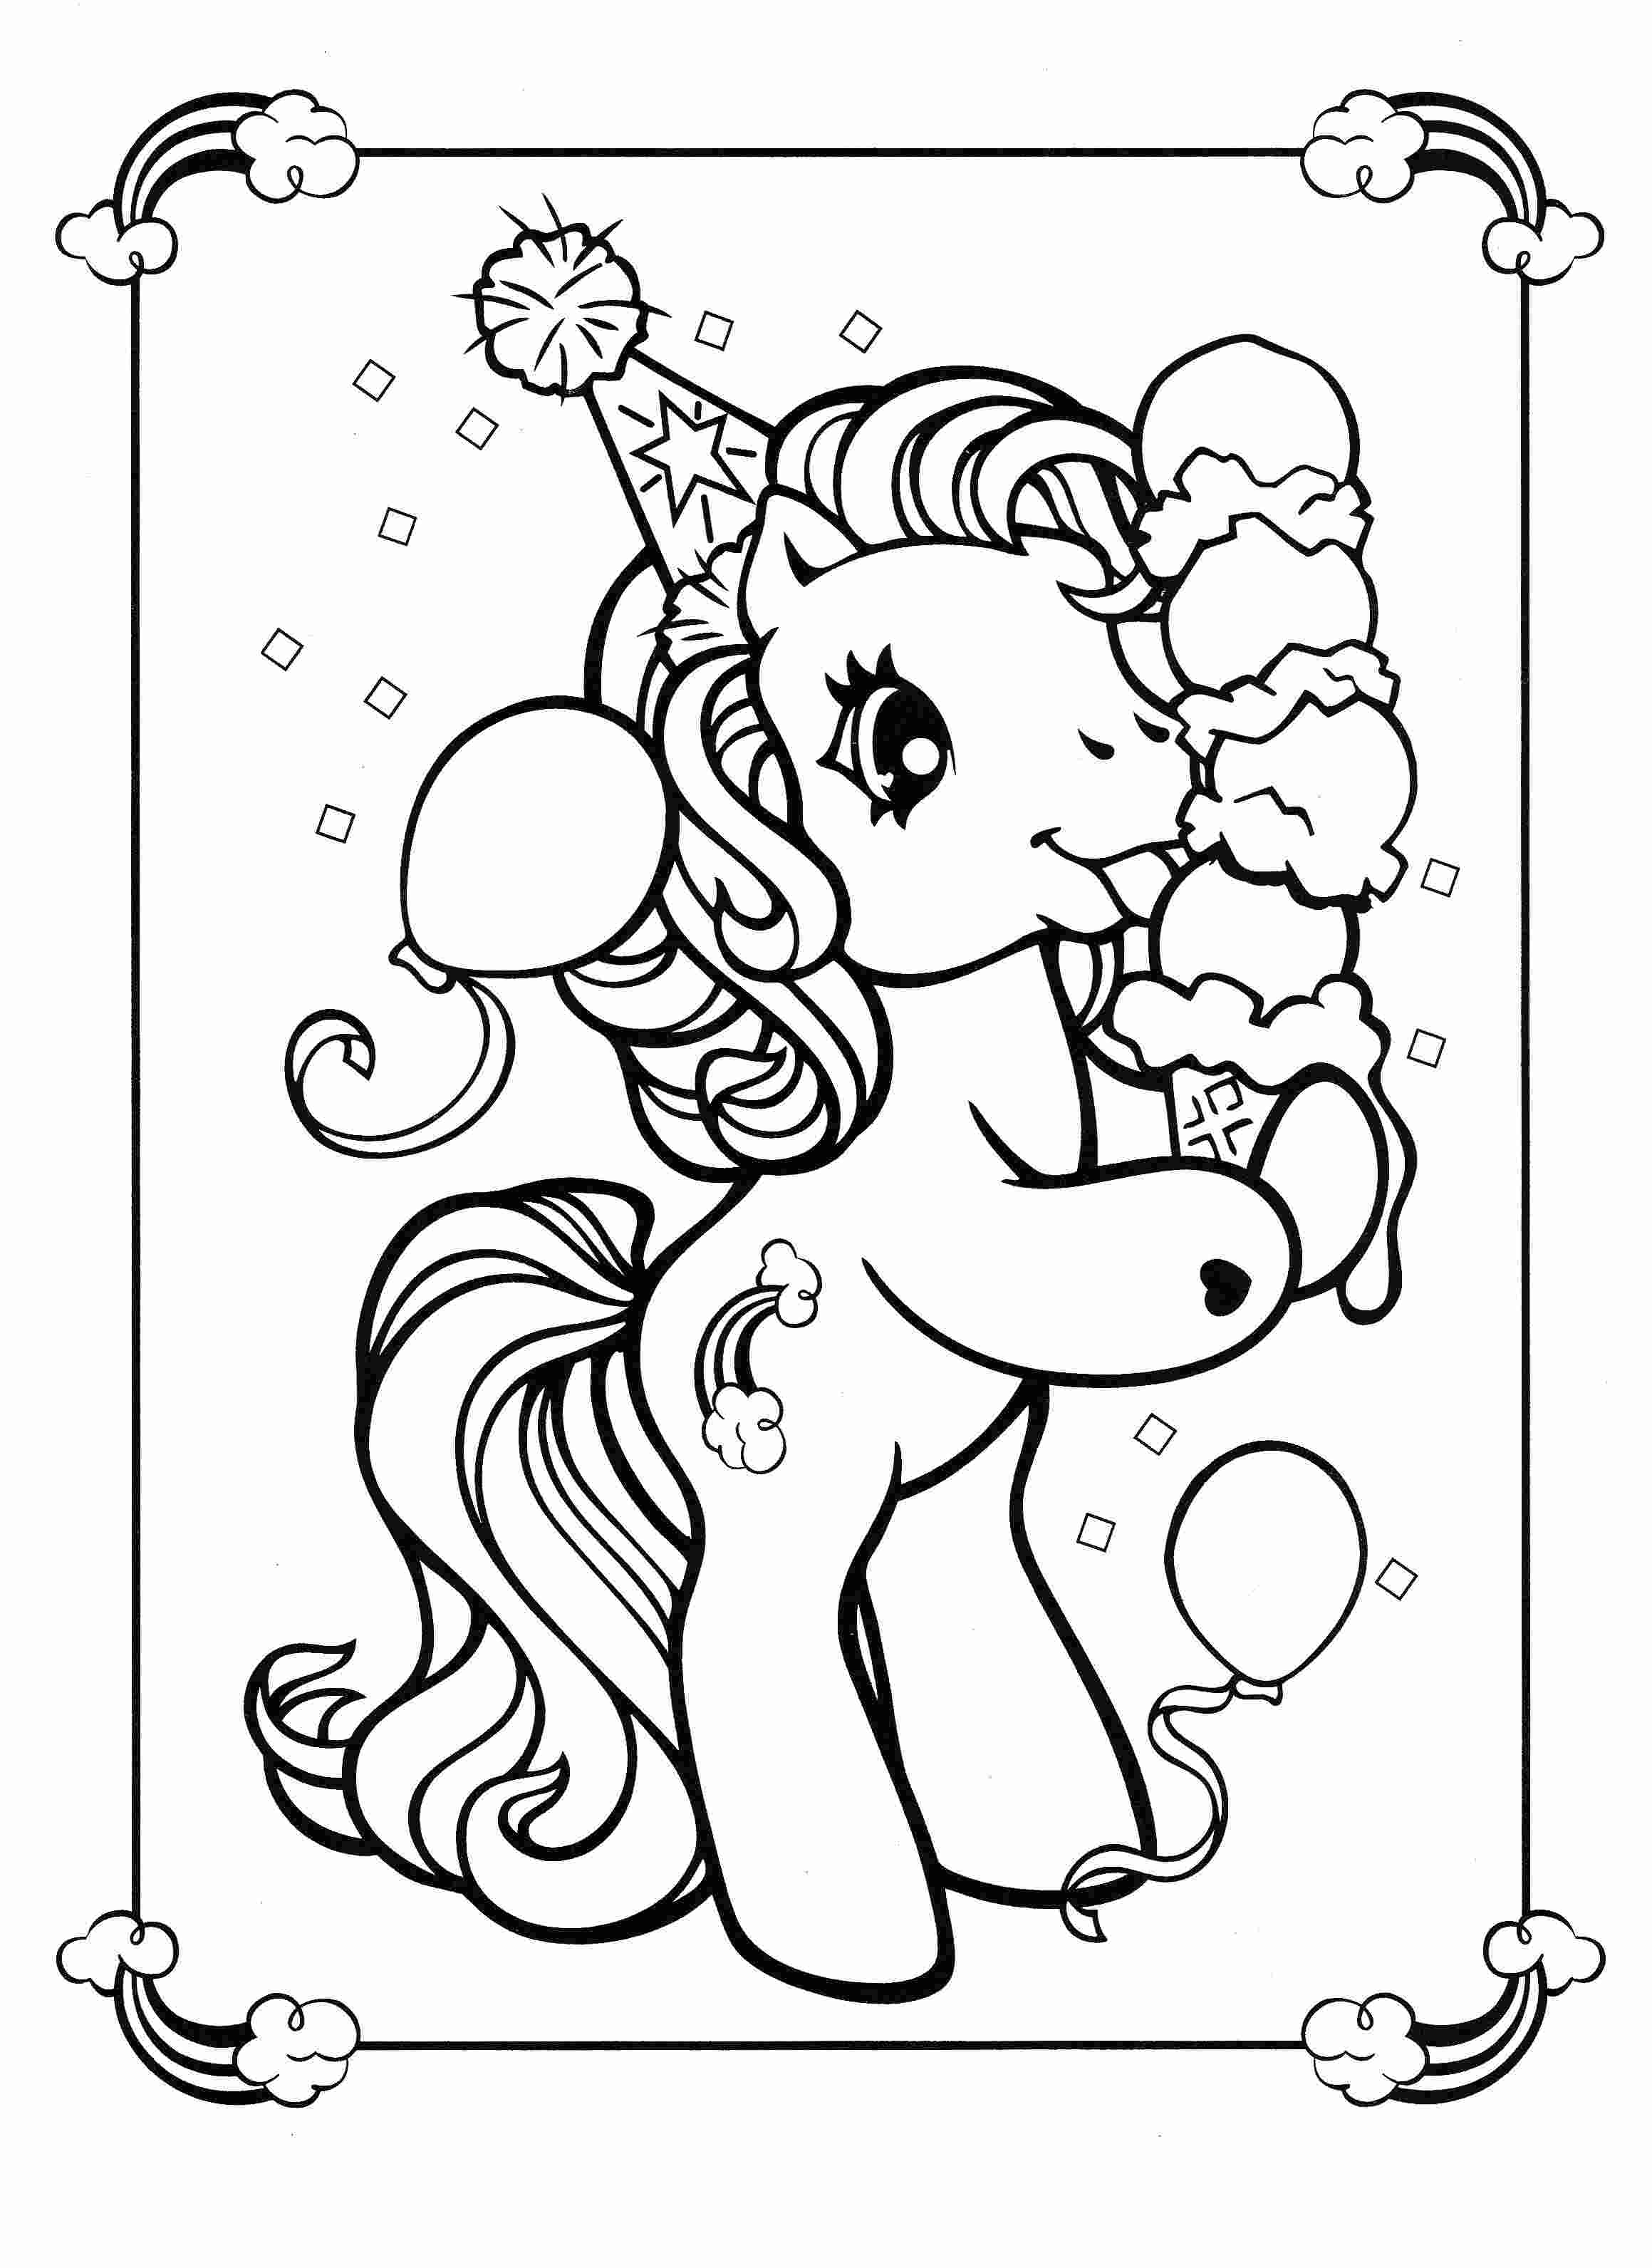 Rainbow Dash Cutie Mark Coloring Pages my little pony apple bloom ...